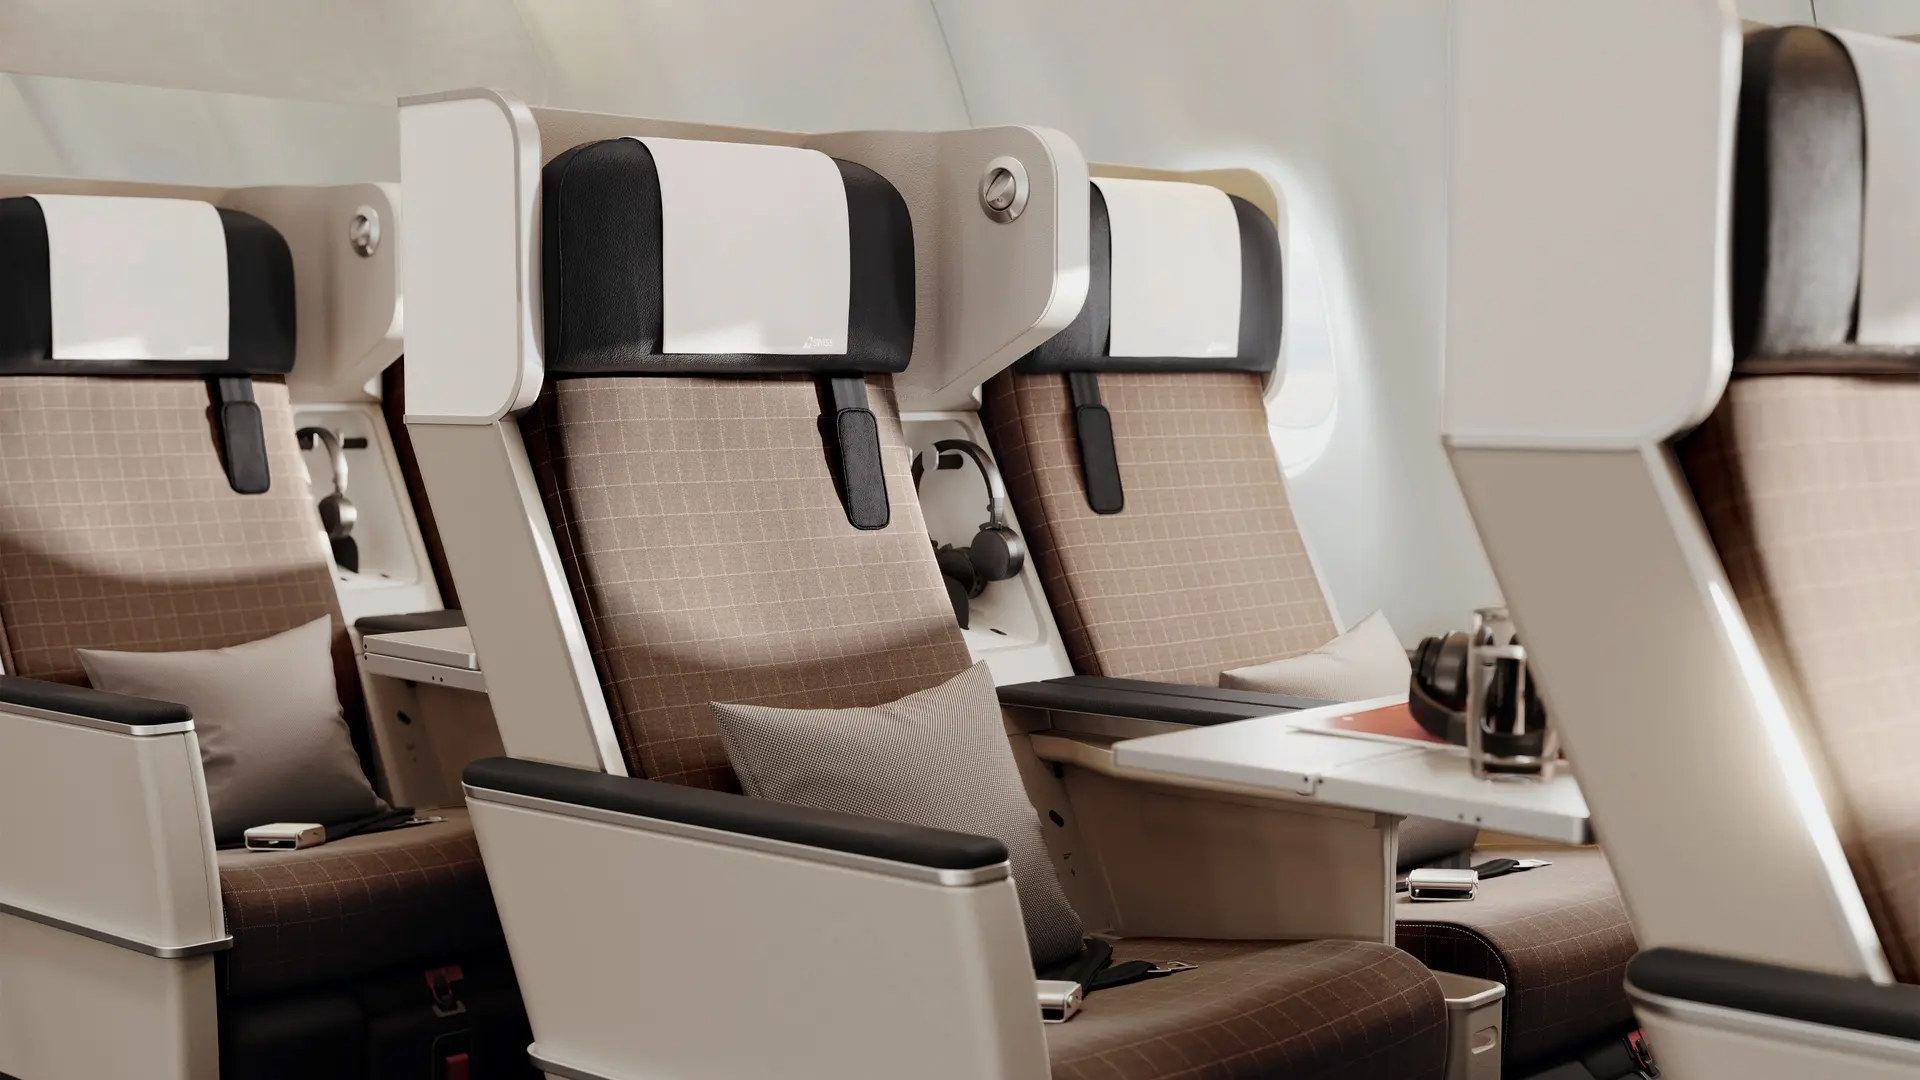 Airlines News - SWISS unveils its new Business and First Class cabins